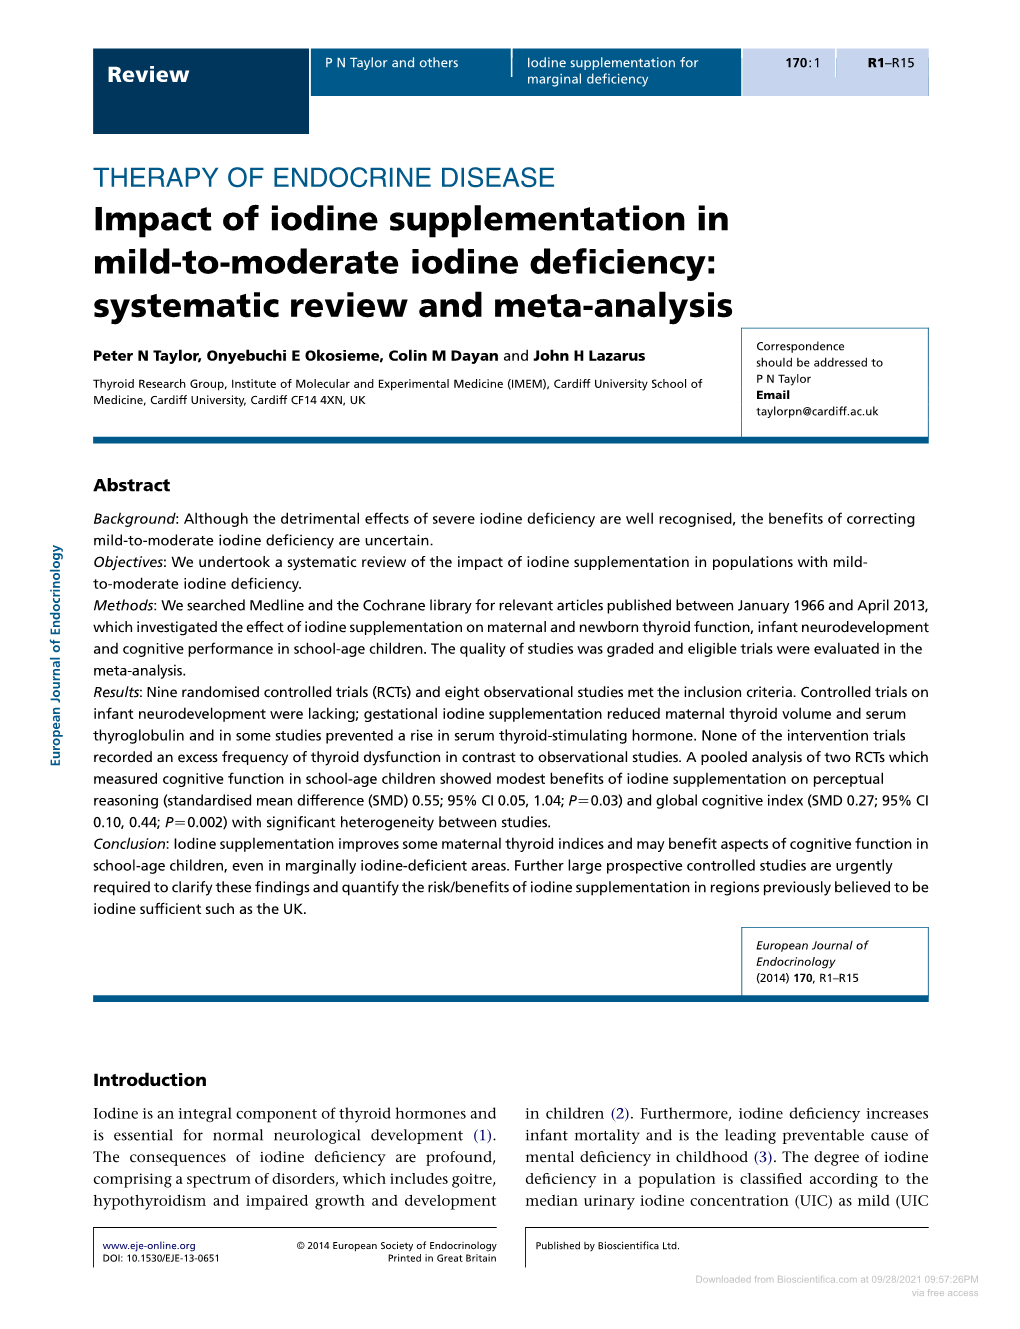 Impact of Iodine Supplementation in Mild-To-Moderate Iodine Deficiency